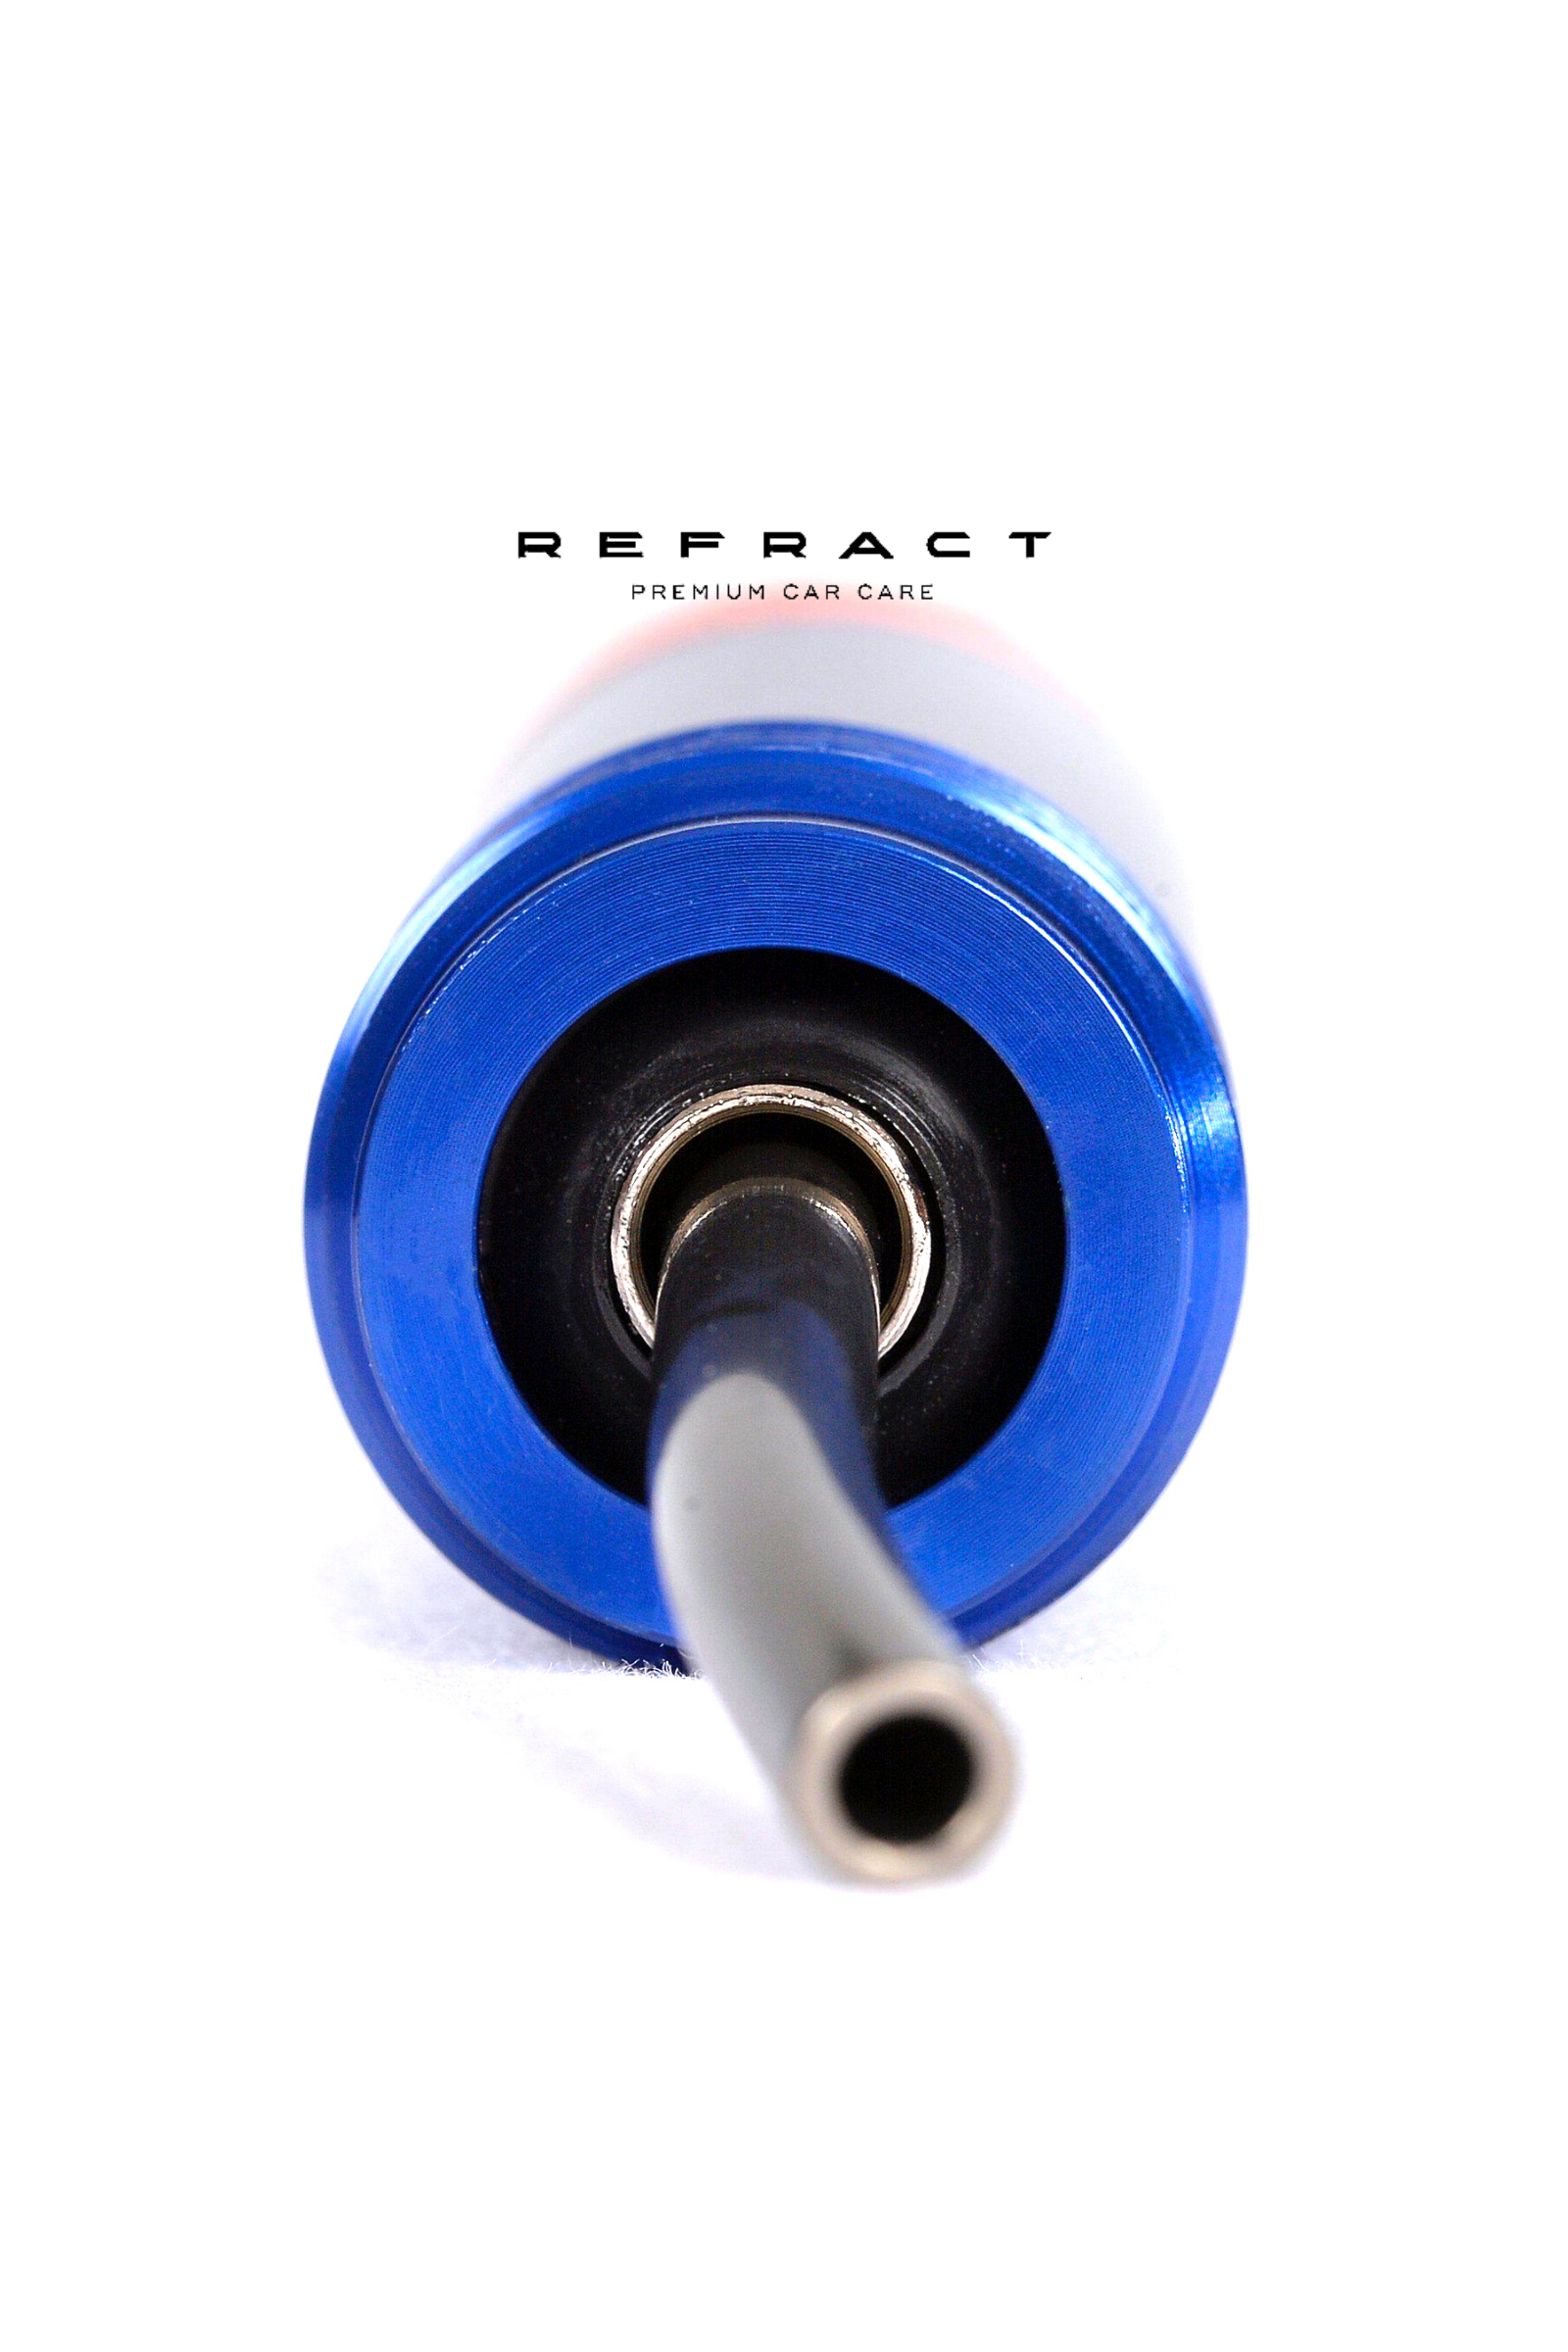 Refract Premium Car Care Products REFRACT Fury HD Interior Tornador Air Cleaning Gun $149.95